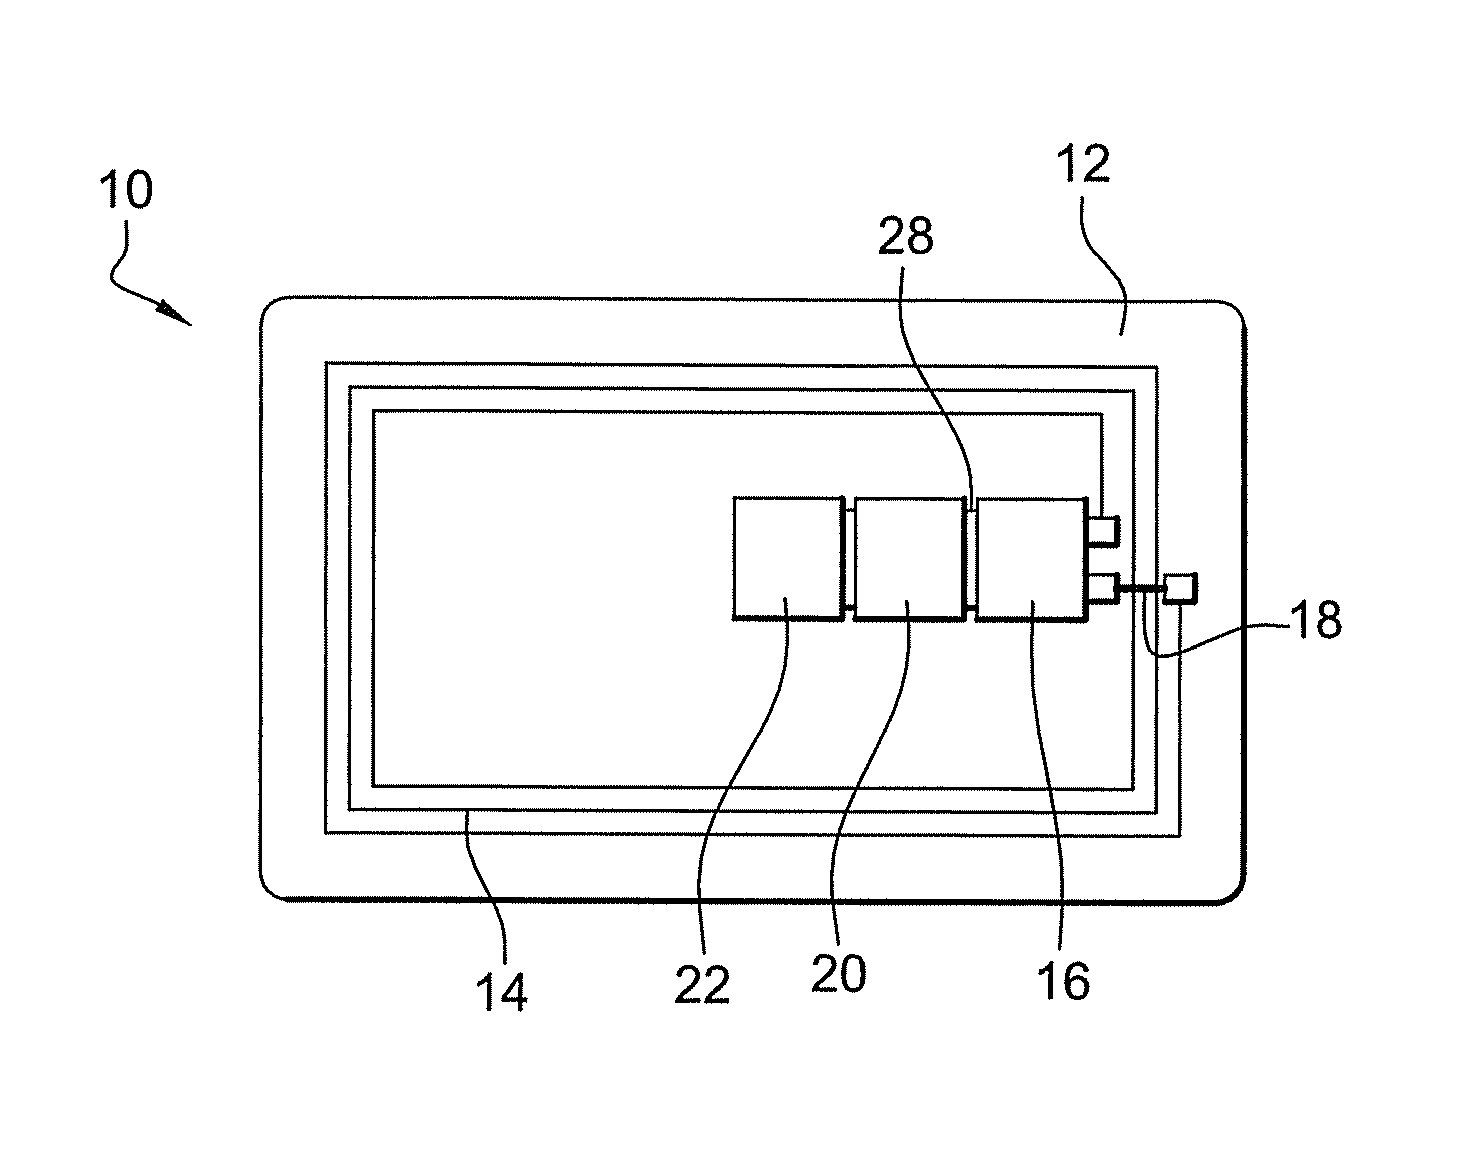 Contactless communication device